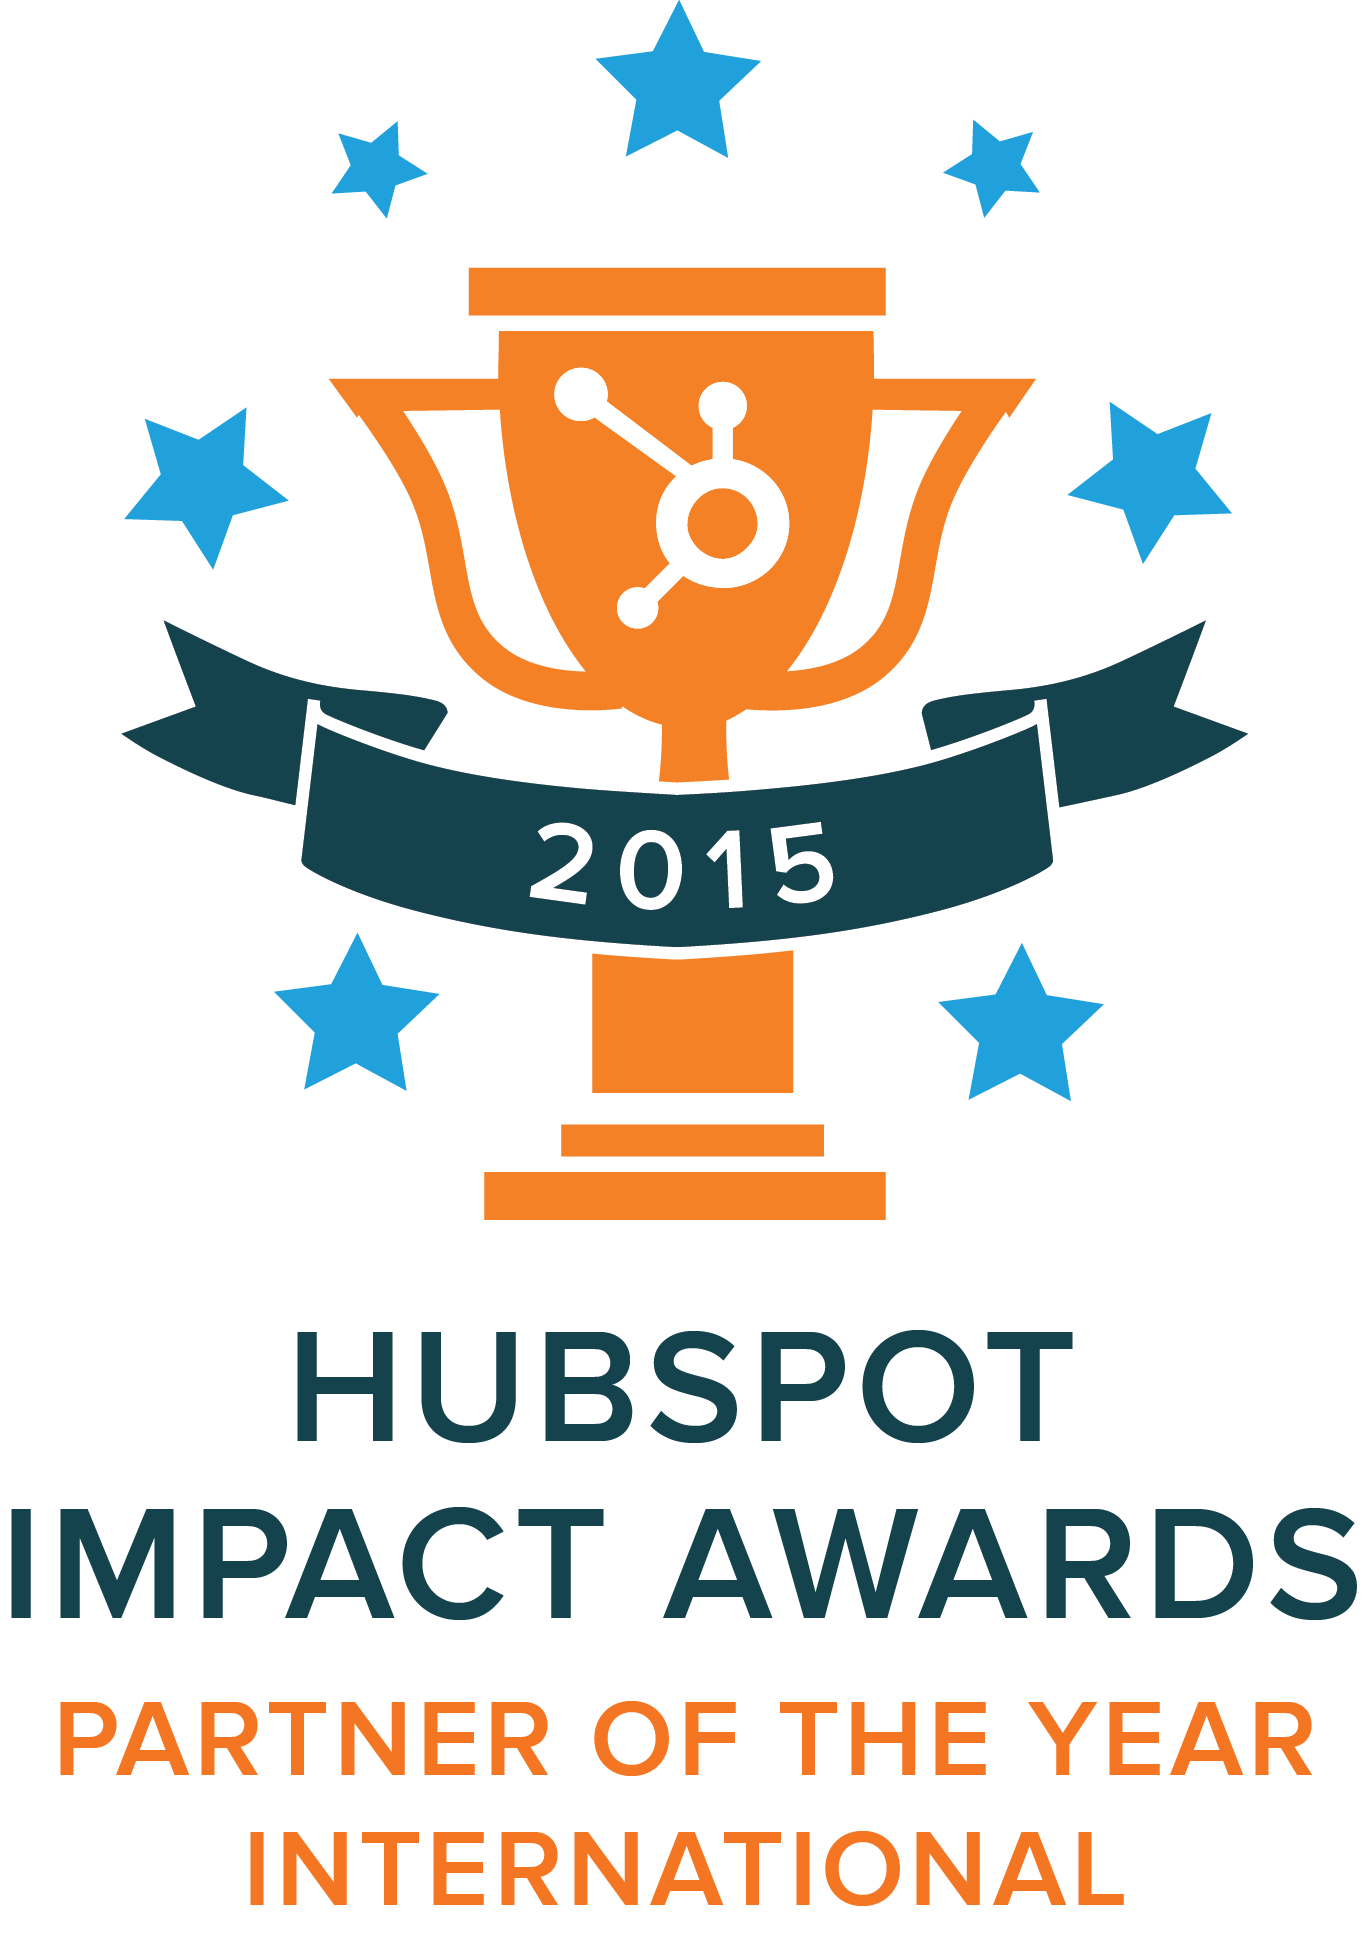 The Kingdom - HubSpot Partner of the Year